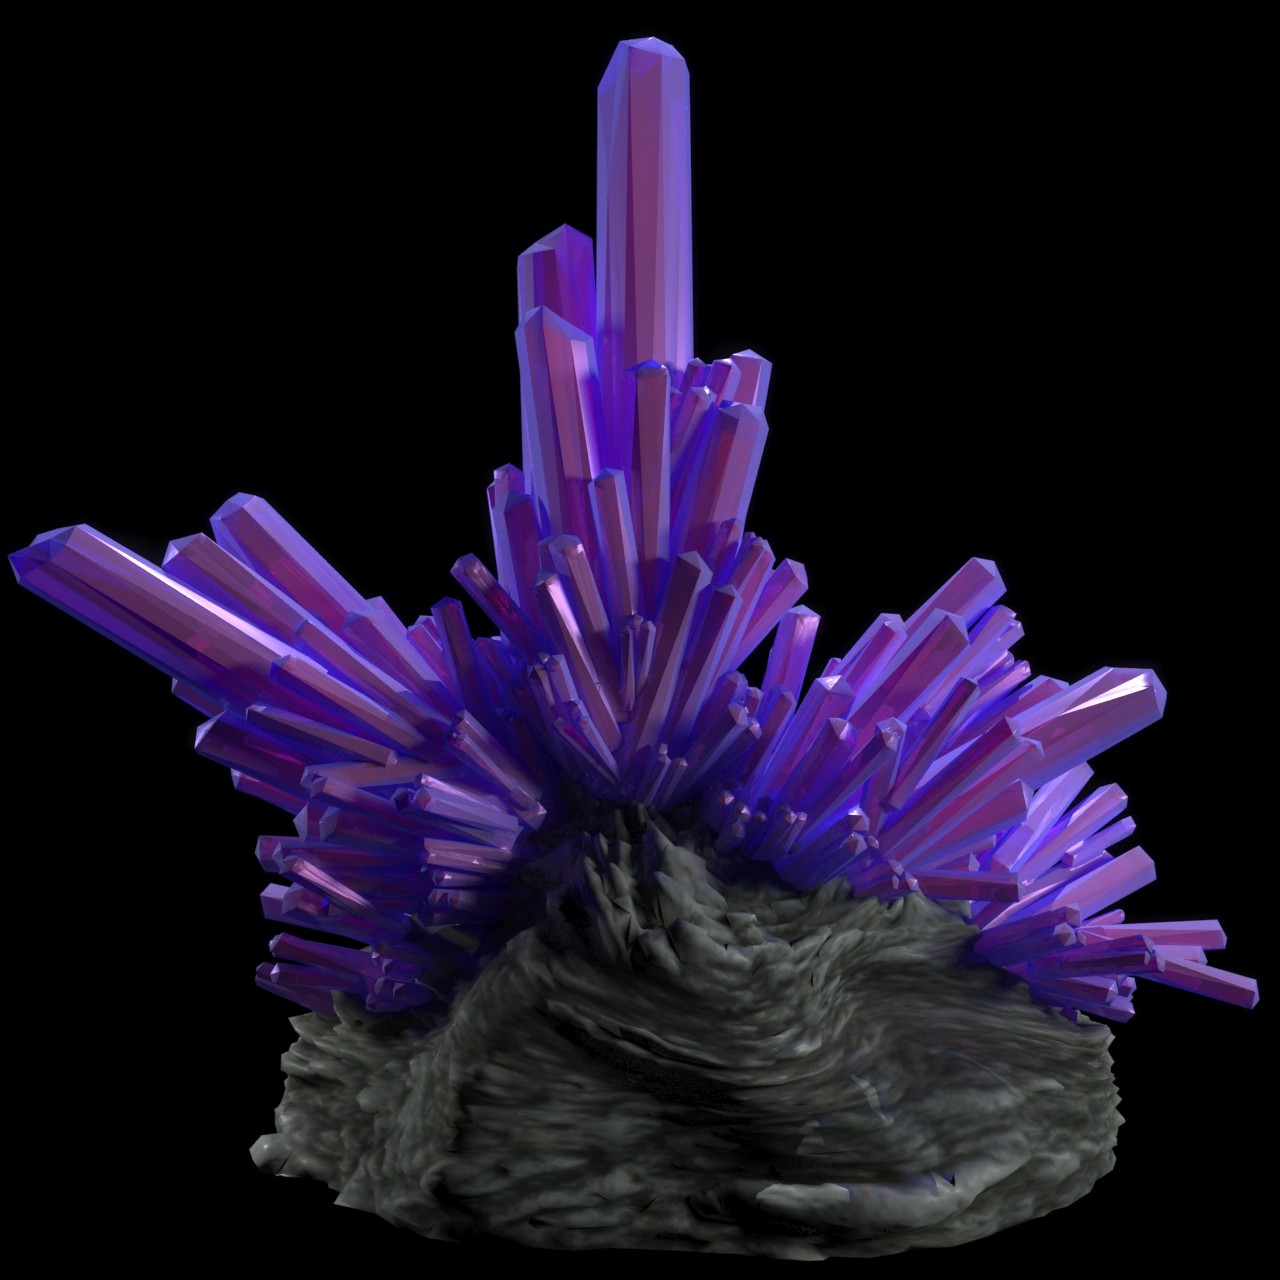 Lowx crystal. Кристалл 3d. 3 Кристалла. Кристалл 3d модель. Кристаллы 3d model.